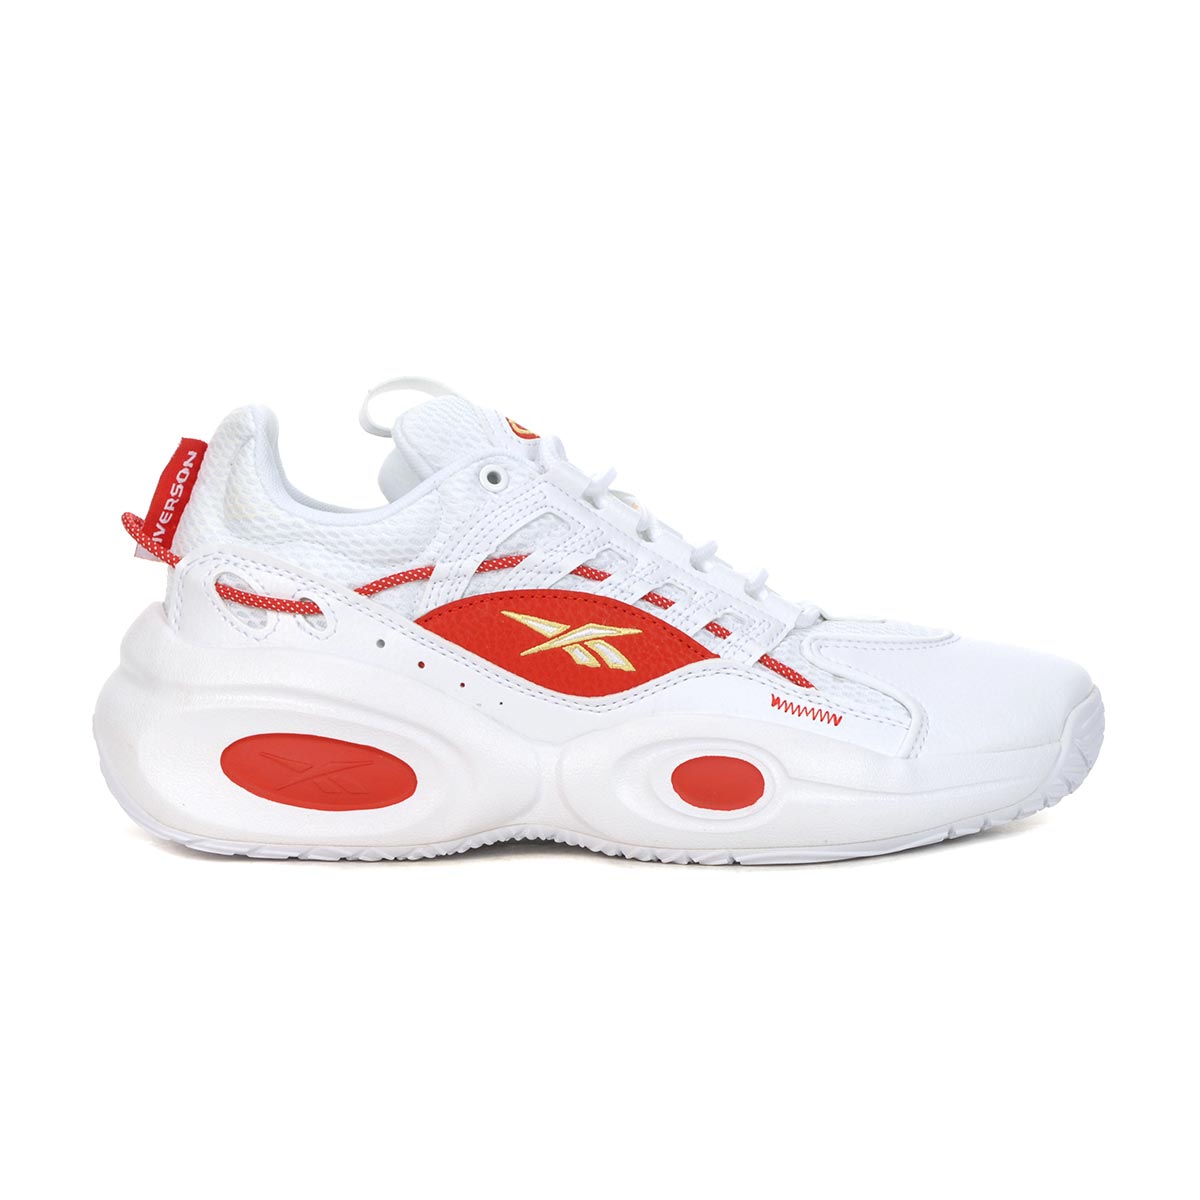 Reebok Men's Solution Mid White/Vector Red Basketball Shoes